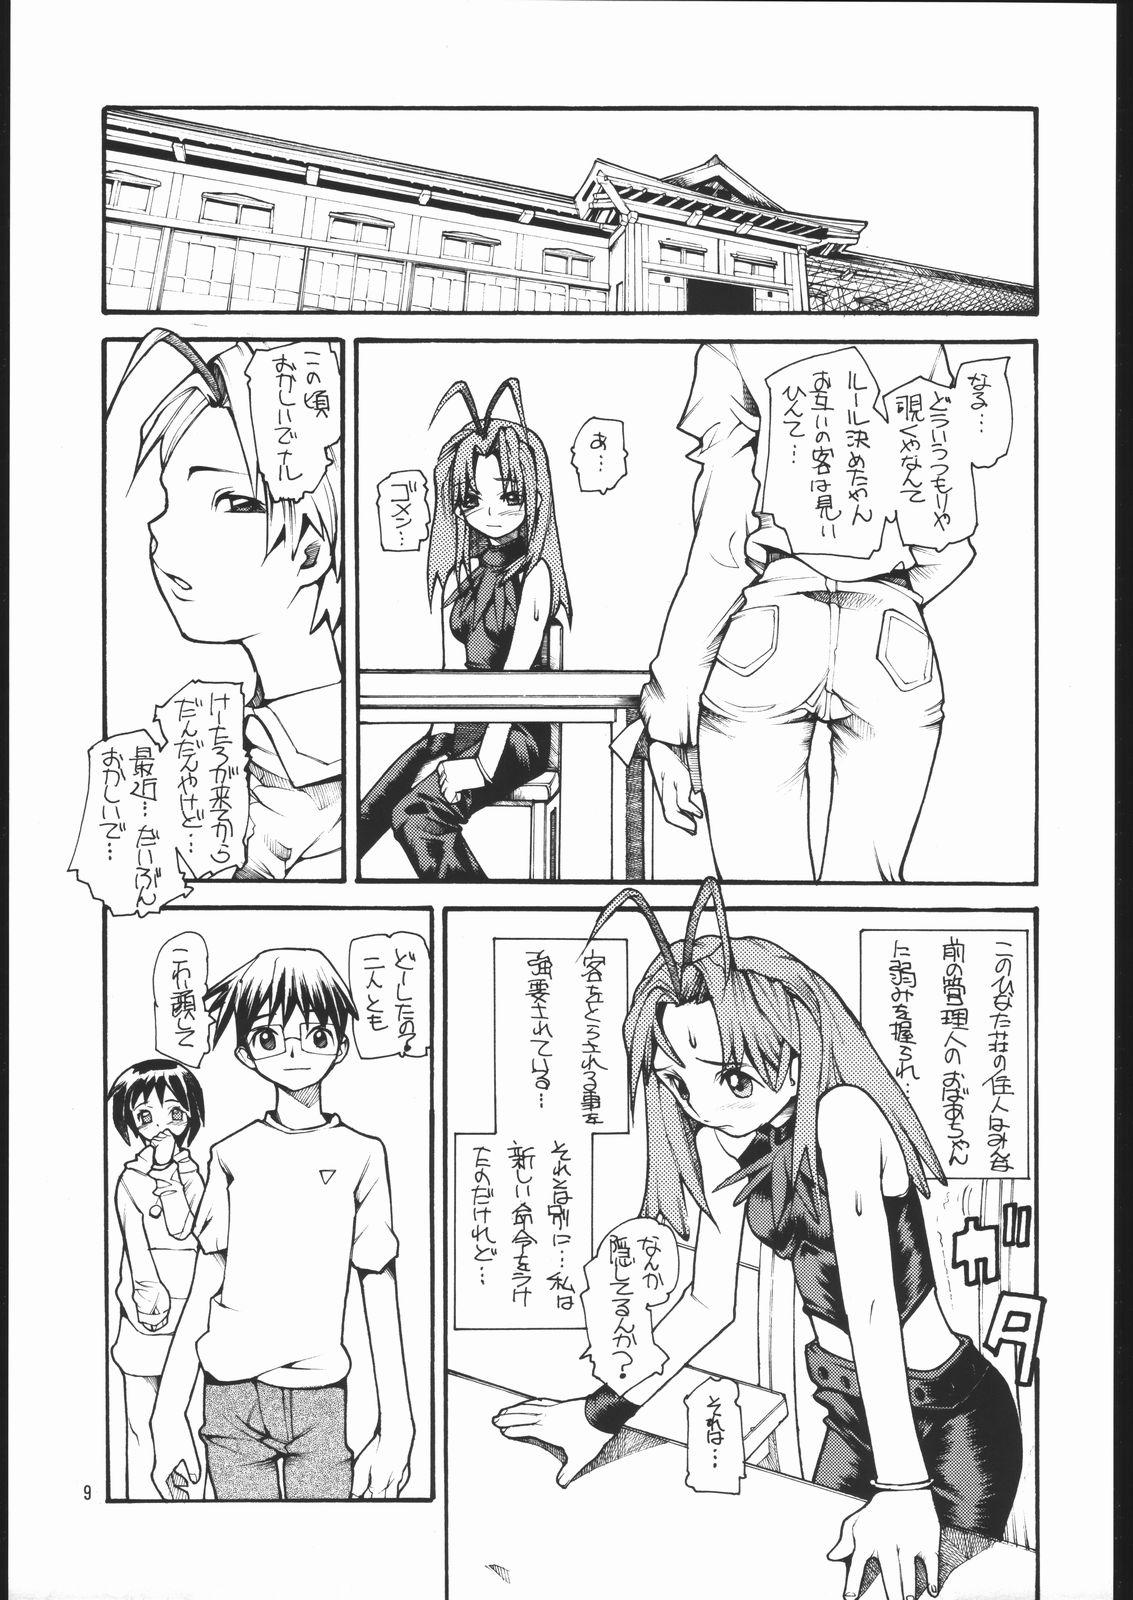 Cock Suckers HR6 | Hyper Resturant 6 - Love hina Muscle - Page 8